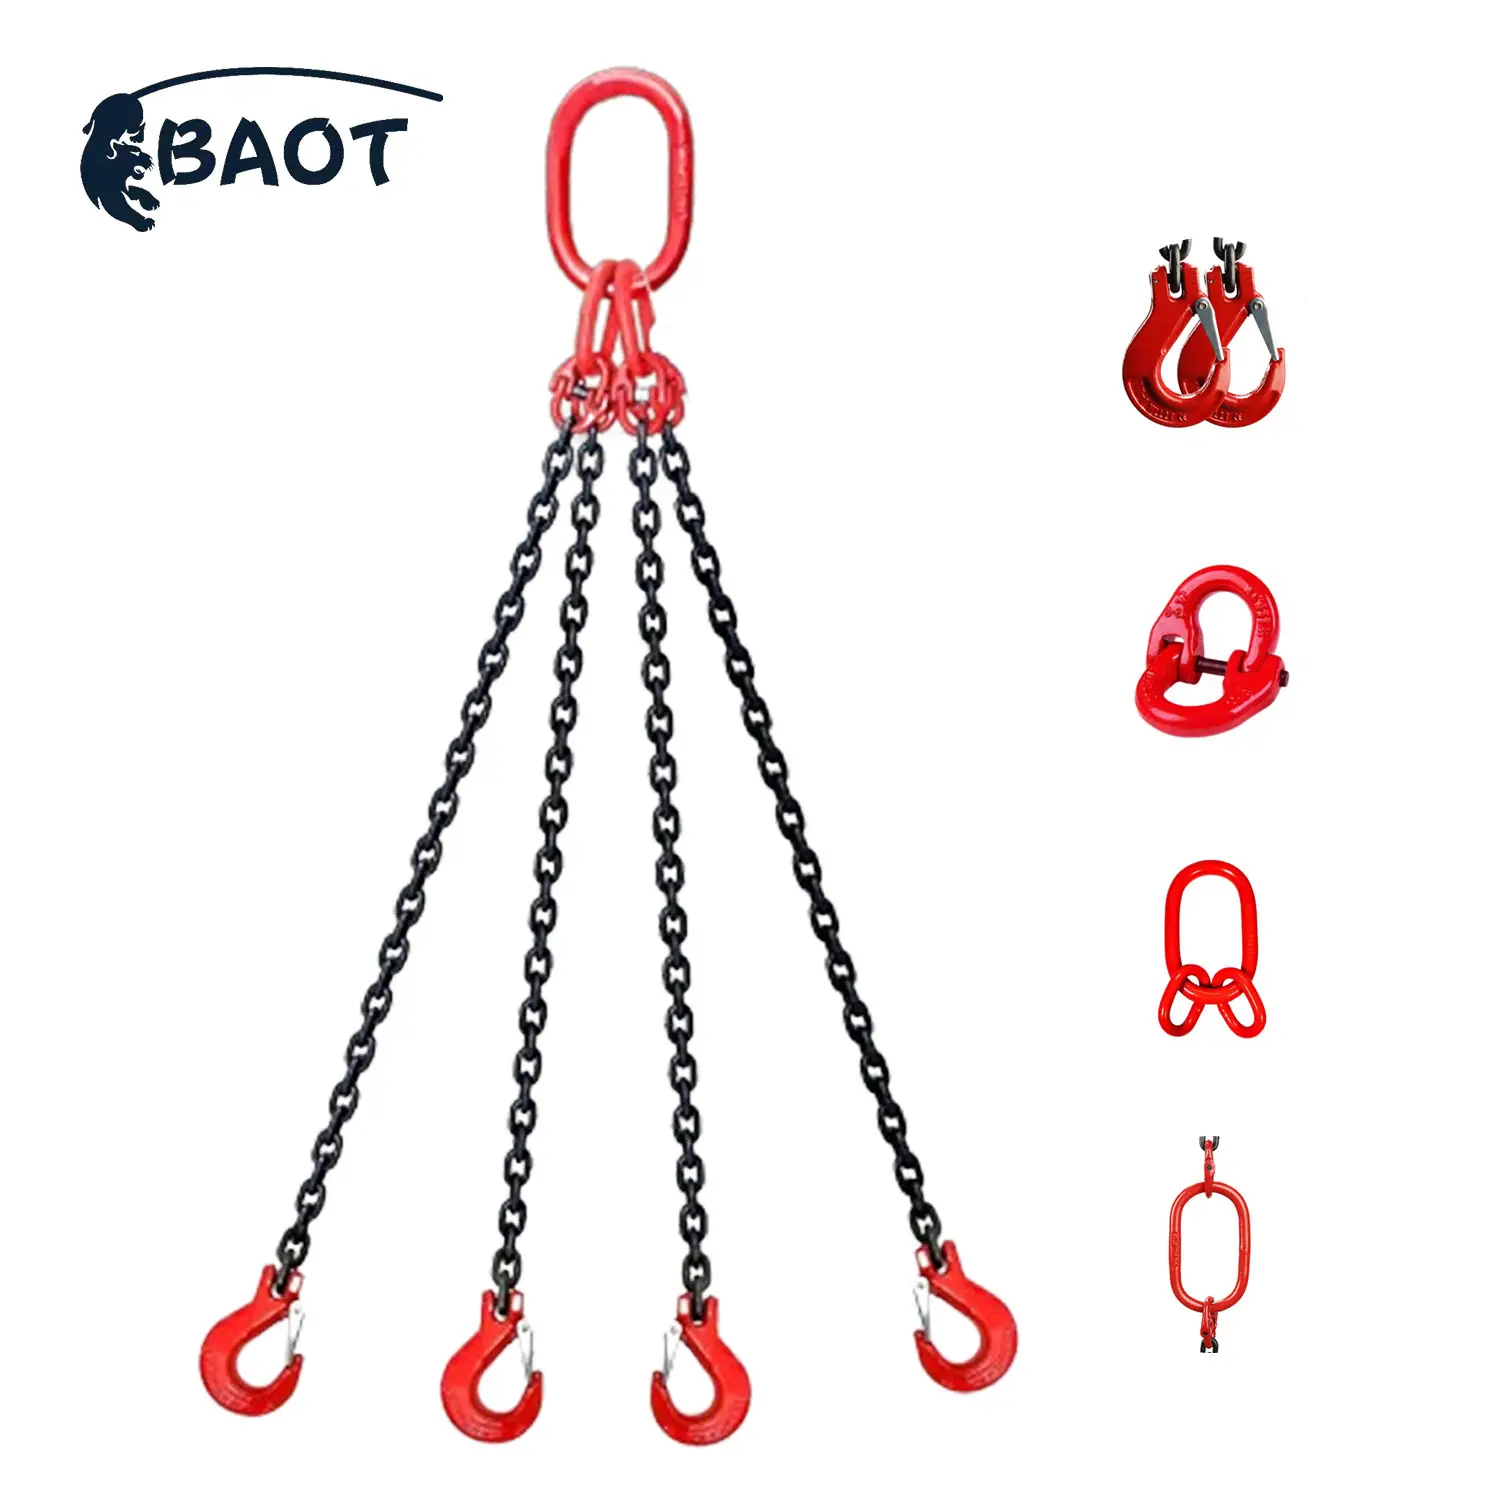 Rigging Hardware Grade 80 Four Legs Hook Alloy Steel Lifting Lifting Chain Sling